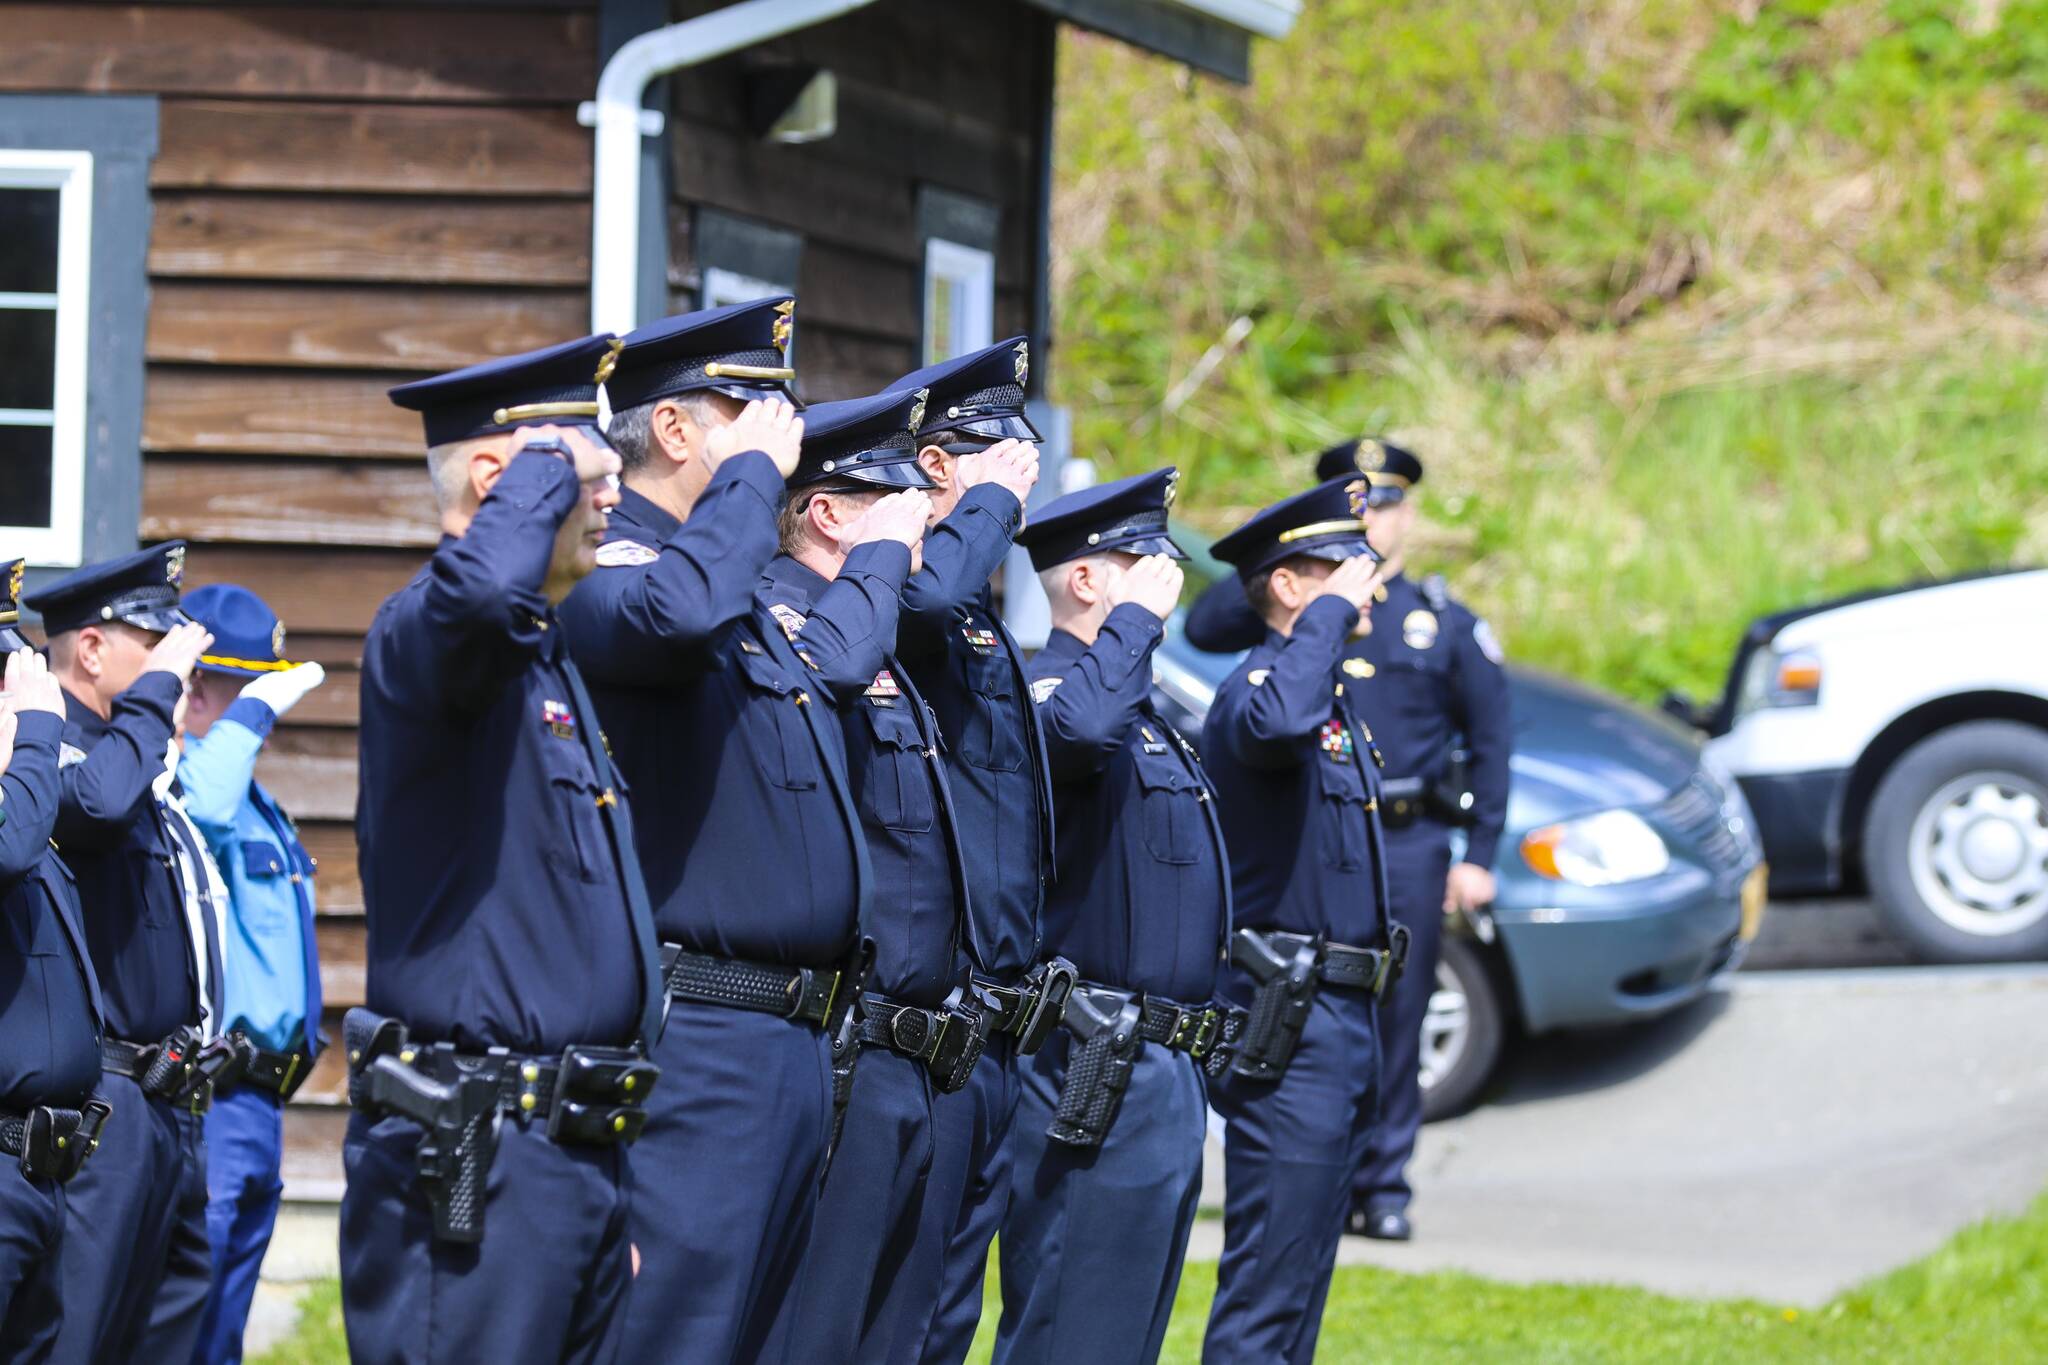 Michael S. Lockett / Juneau Empire
Law enforcement personnel salute as officer lay a ceremonial wreath on the grave of a dead officer at Evergreen Cemetery for Peace Officers Memorial Day on May 13, 2022.